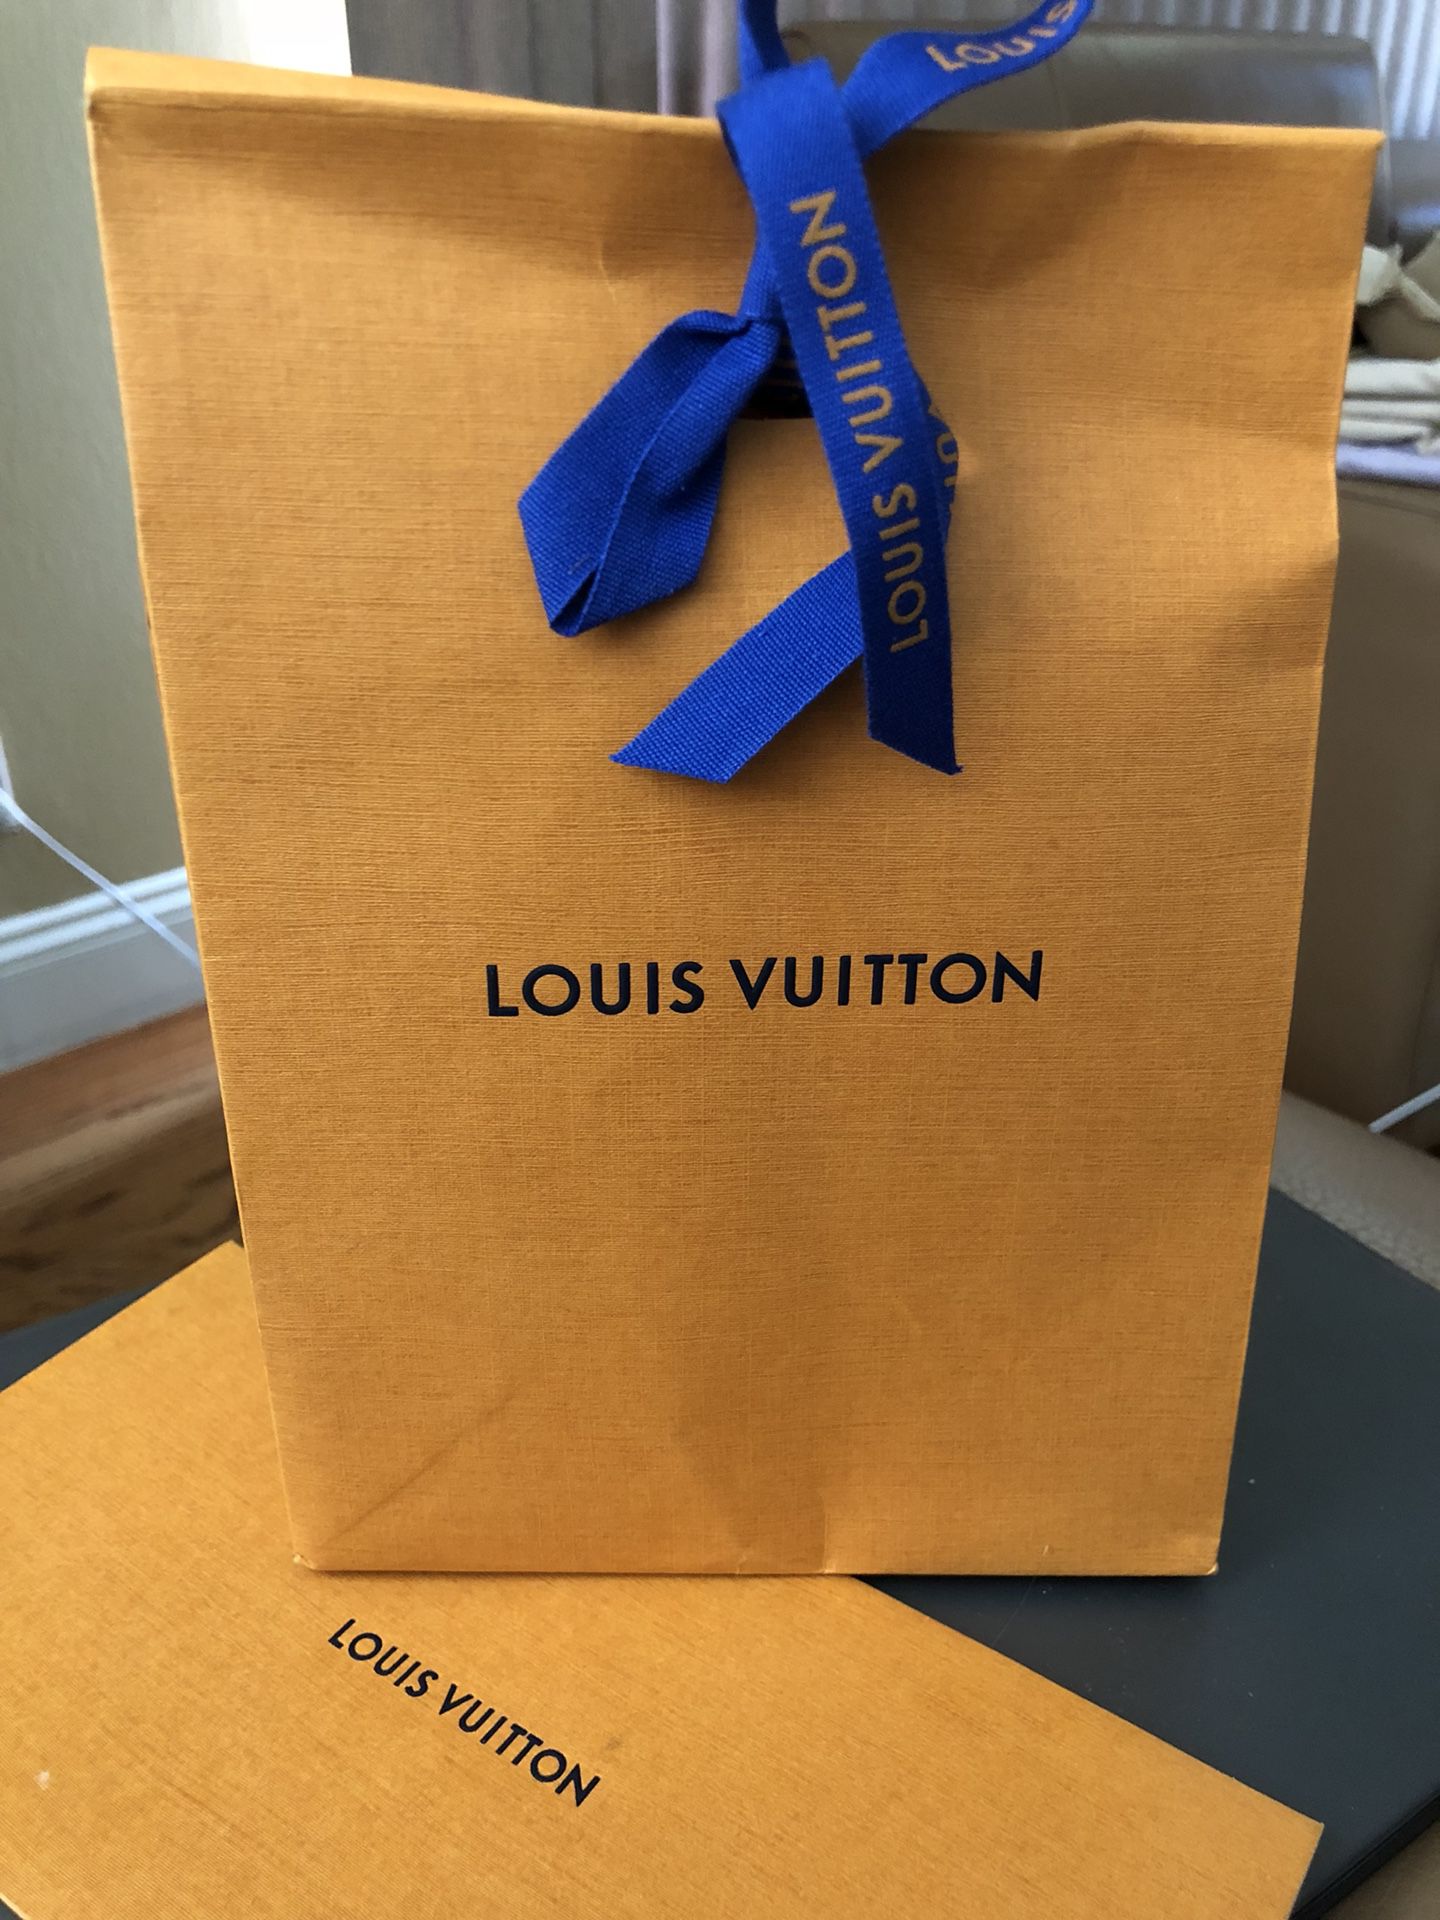 Louis Vuitton Perfume, MILLE FEUX, their best seller for Sale in